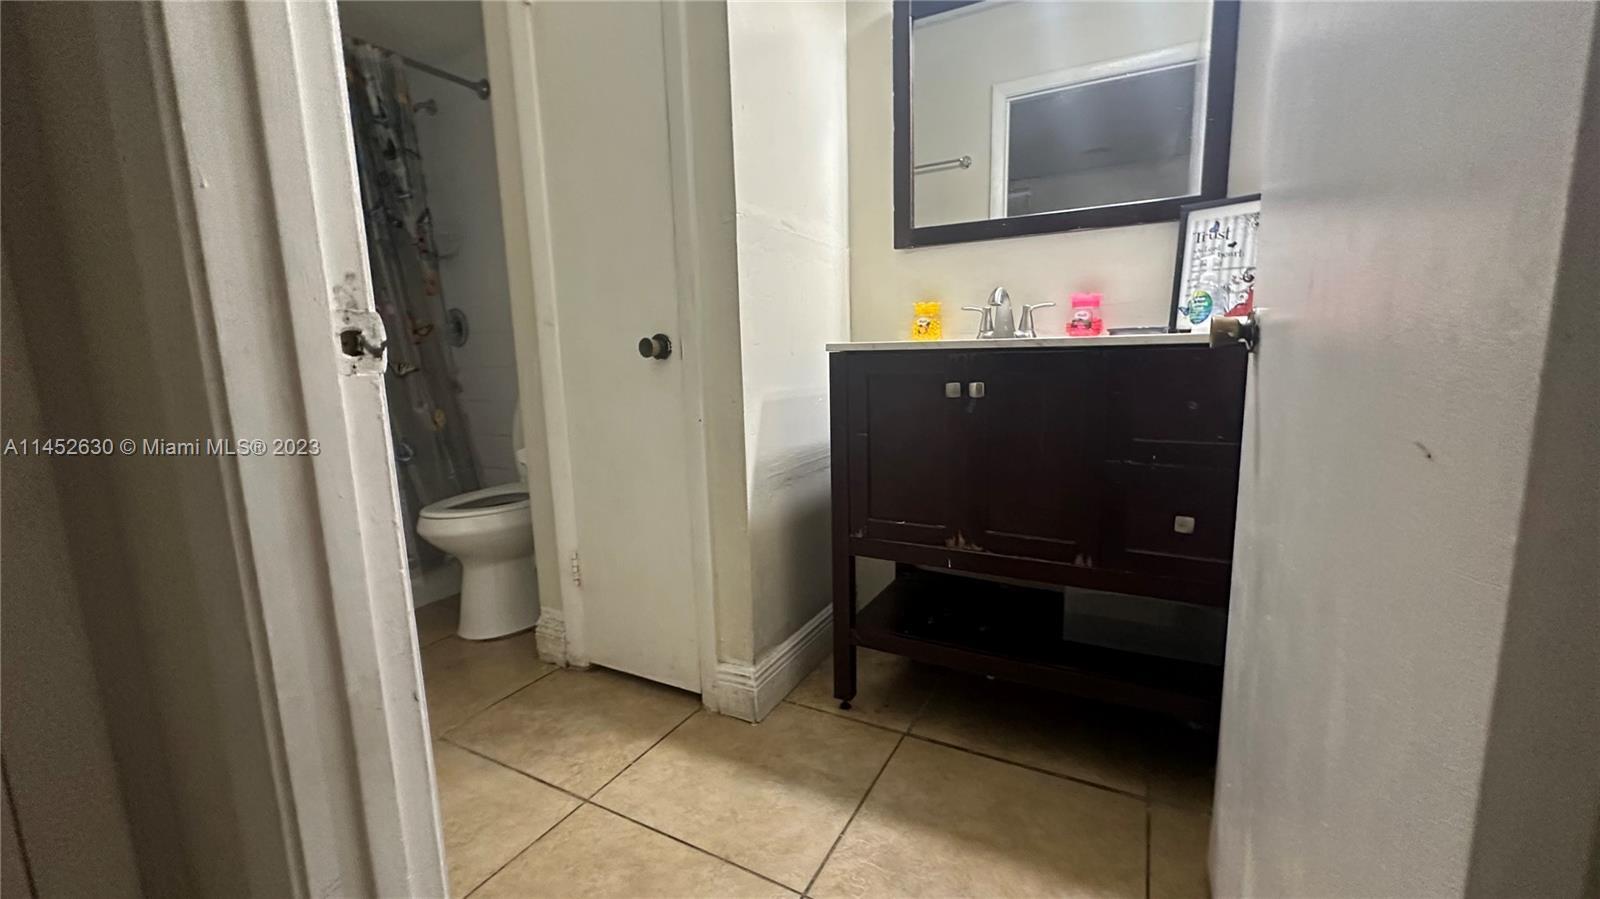 Tiled throughout the unit,new kitchen, new bathrooms, renovated, stainless steel appliances. Washer 